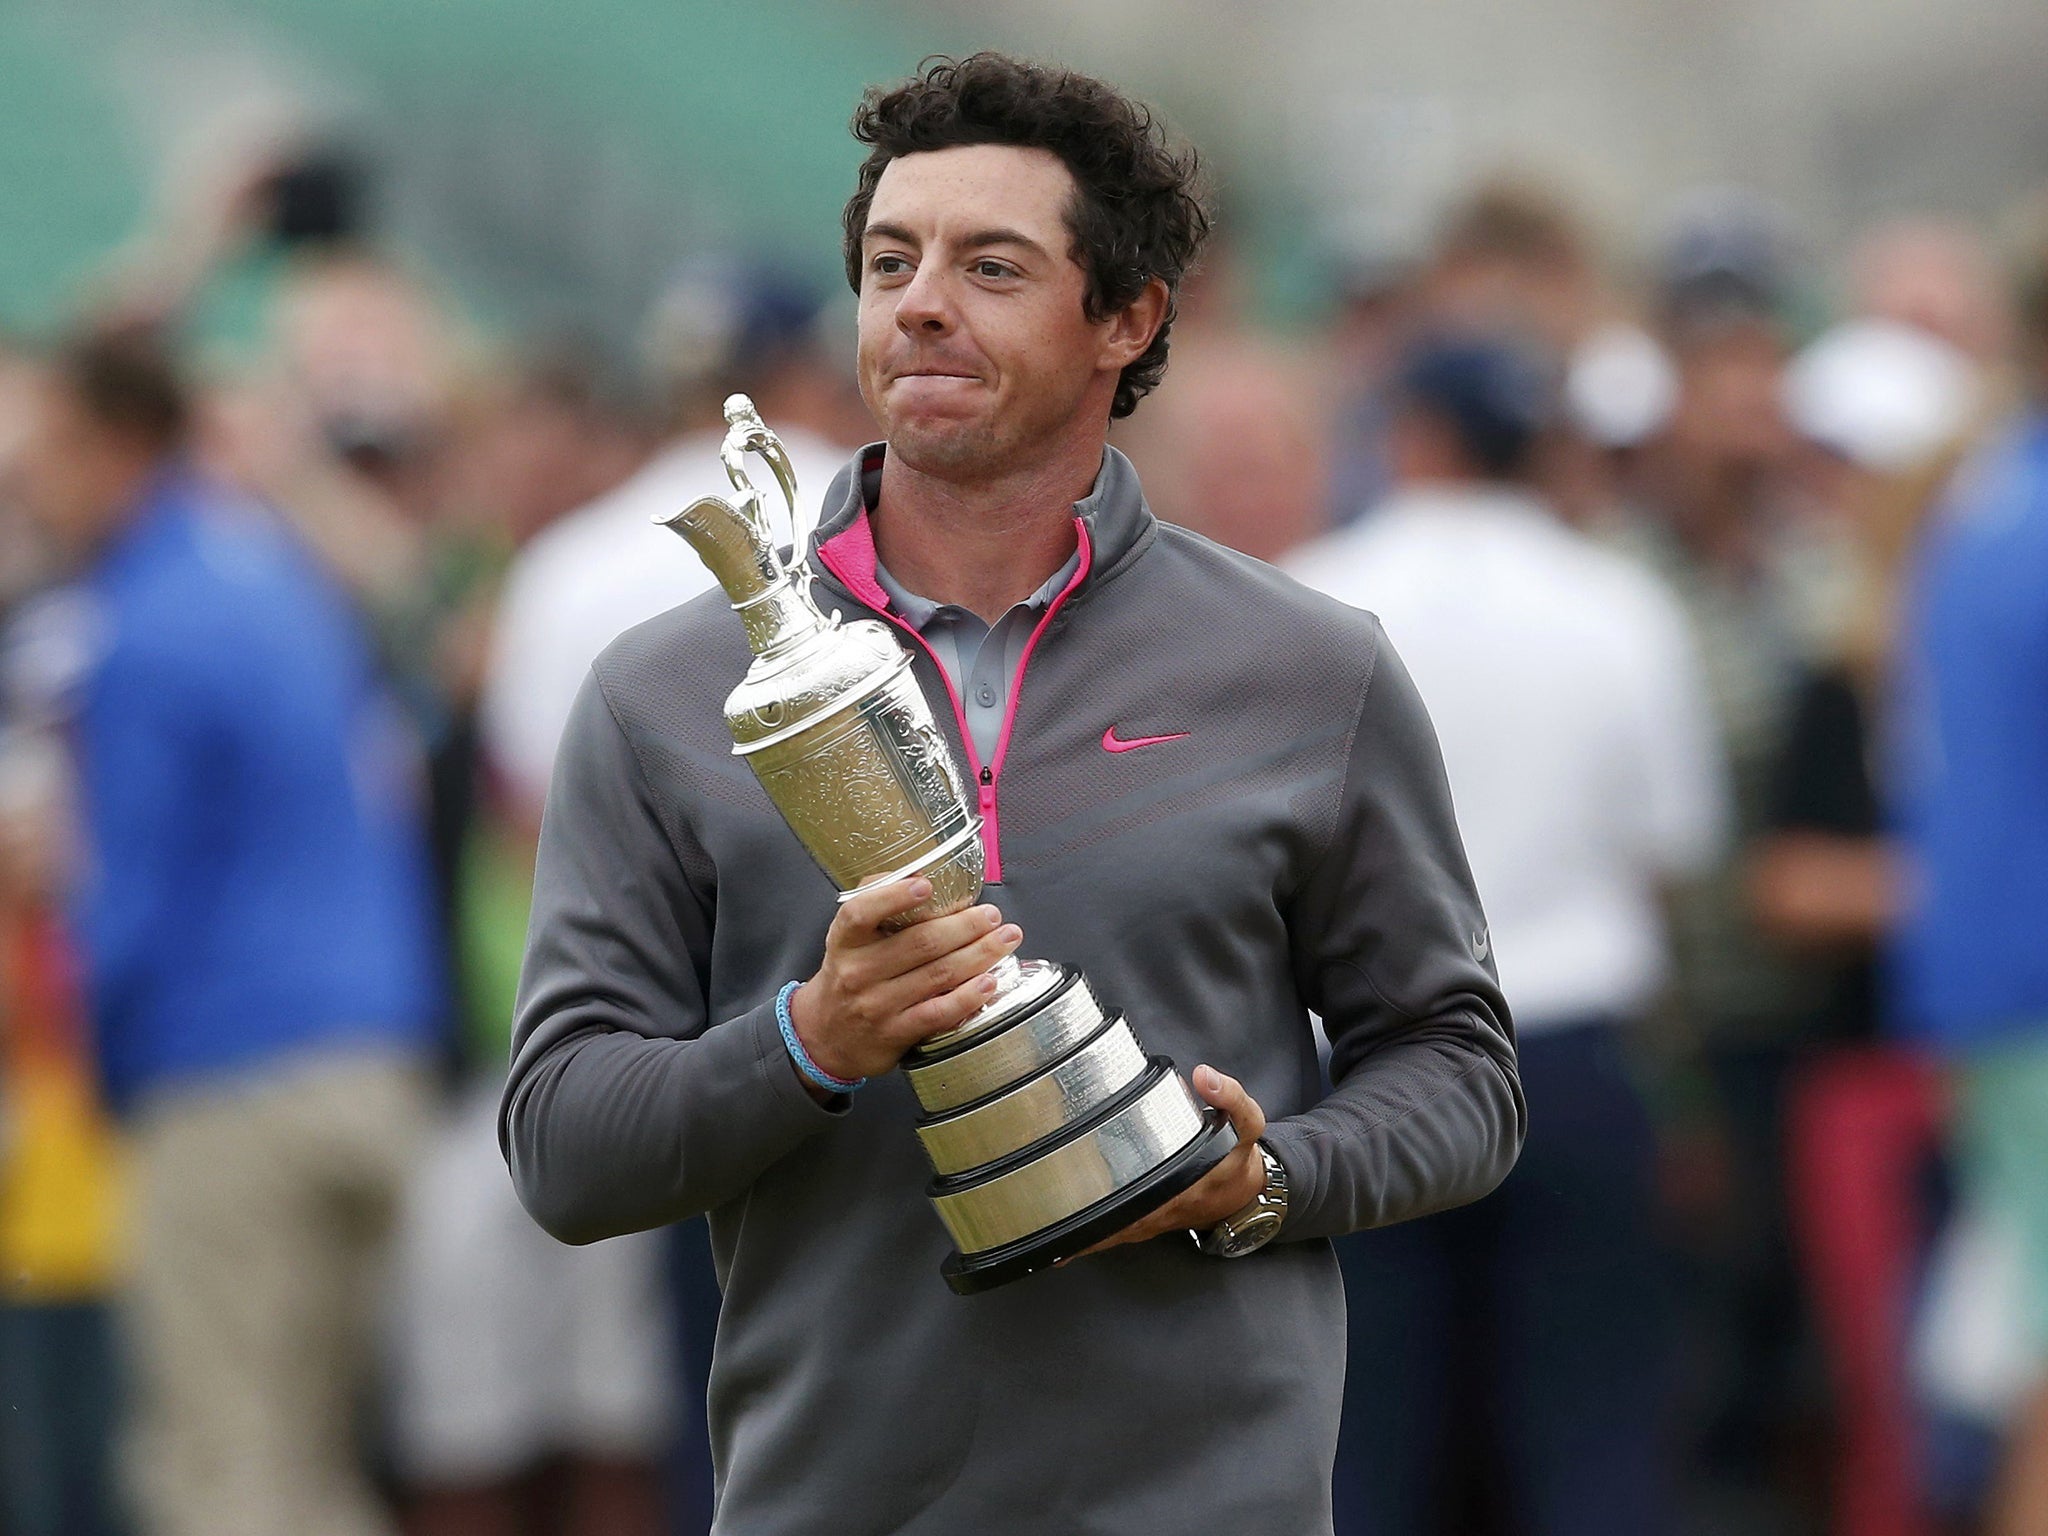 Rory McIlroy of Northern Ireland celebrates as he holds the Claret Jug after winning the British Open Championship at the Royal Liverpool Golf Club in Hoylake, northern England